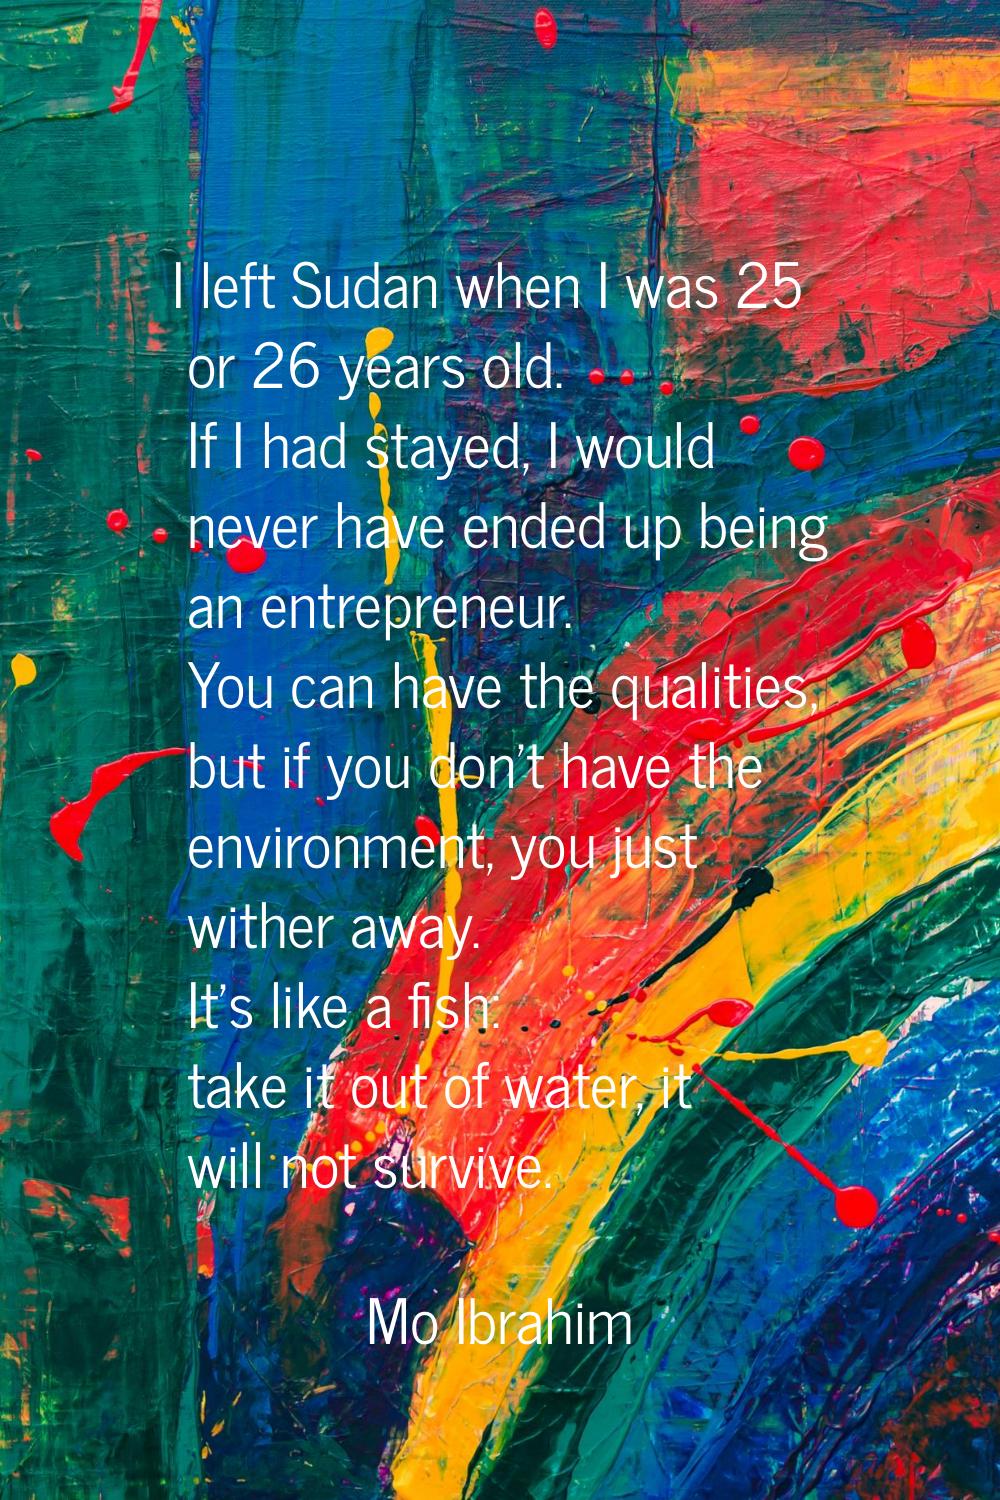 I left Sudan when I was 25 or 26 years old. If I had stayed, I would never have ended up being an e